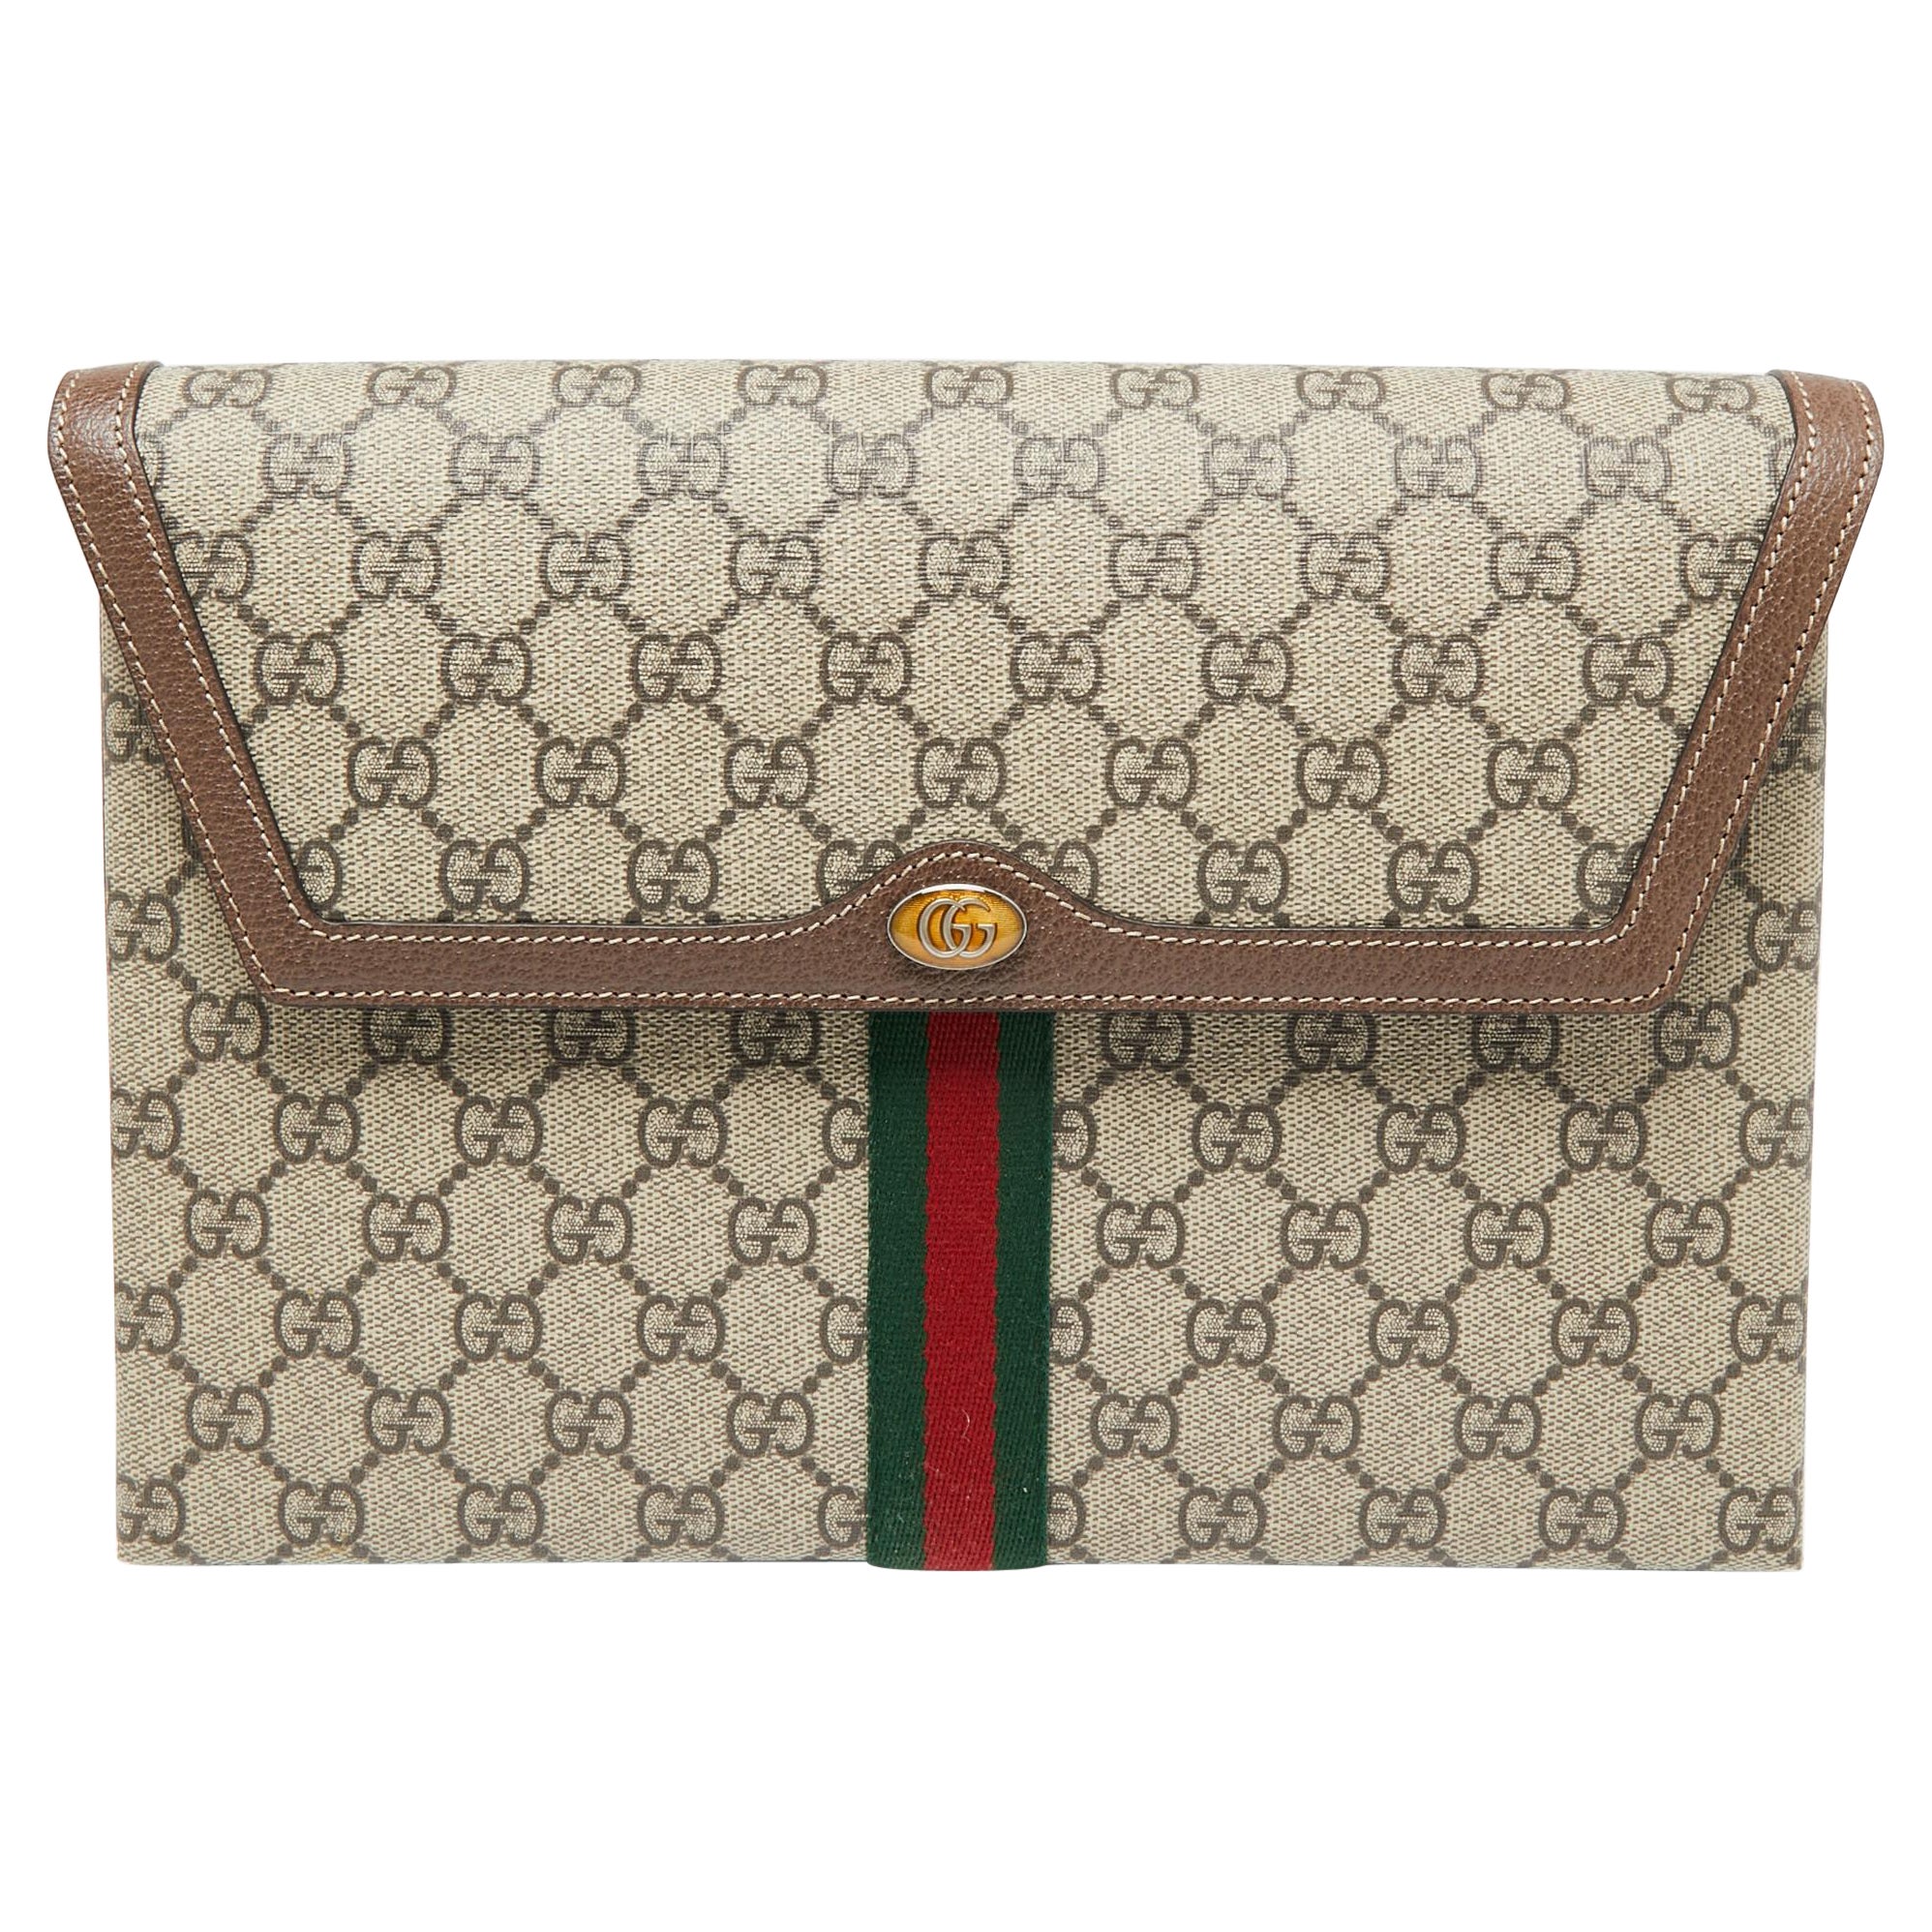 Gucci Beige/Brown GG Supreme Canvas and Leather Ophidia Pouch